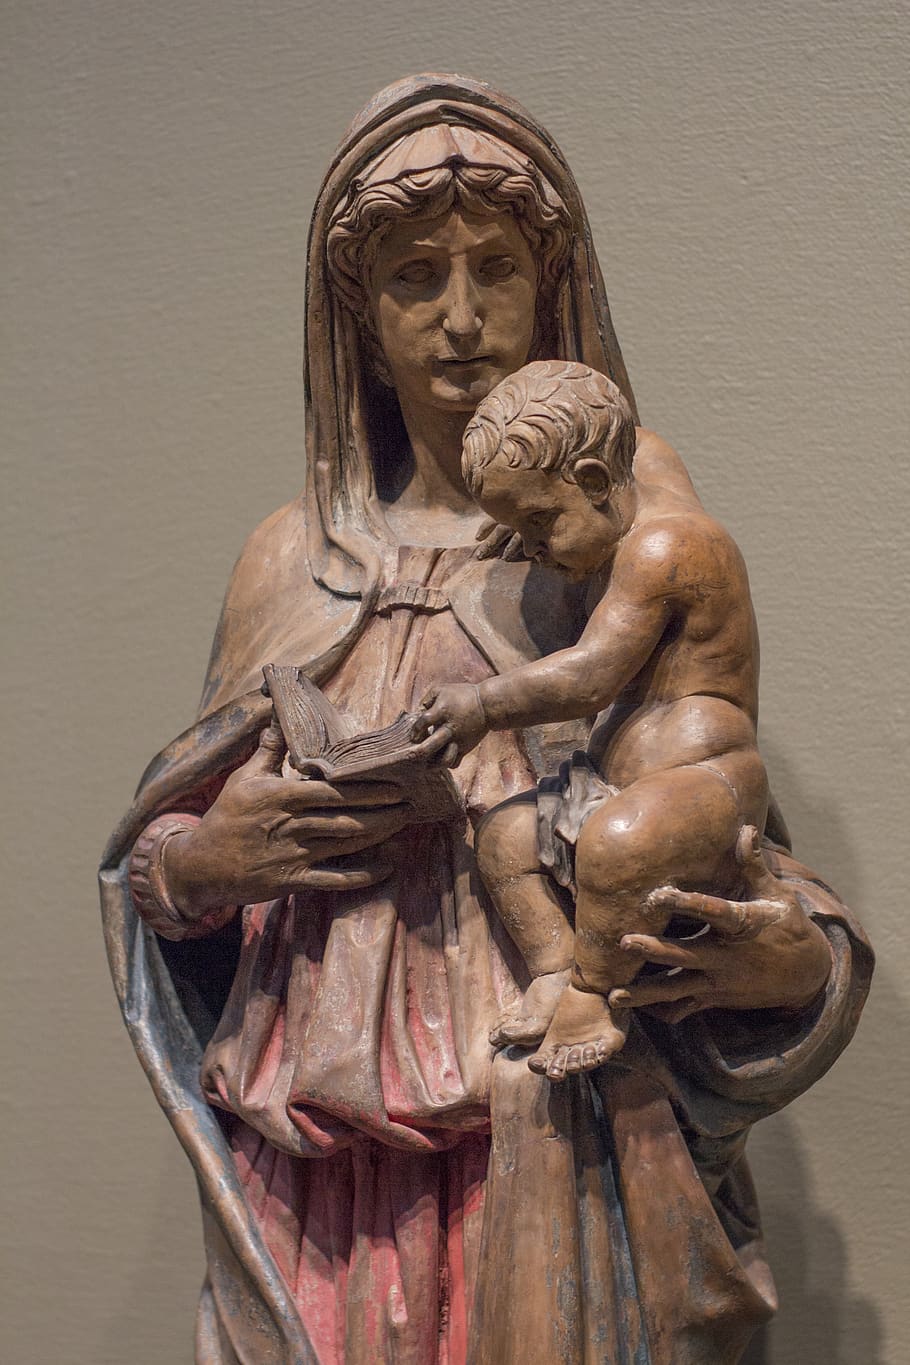 mary, virgin, madonna, sculpture, jesus, baby, christ, christianity, bible, art and craft